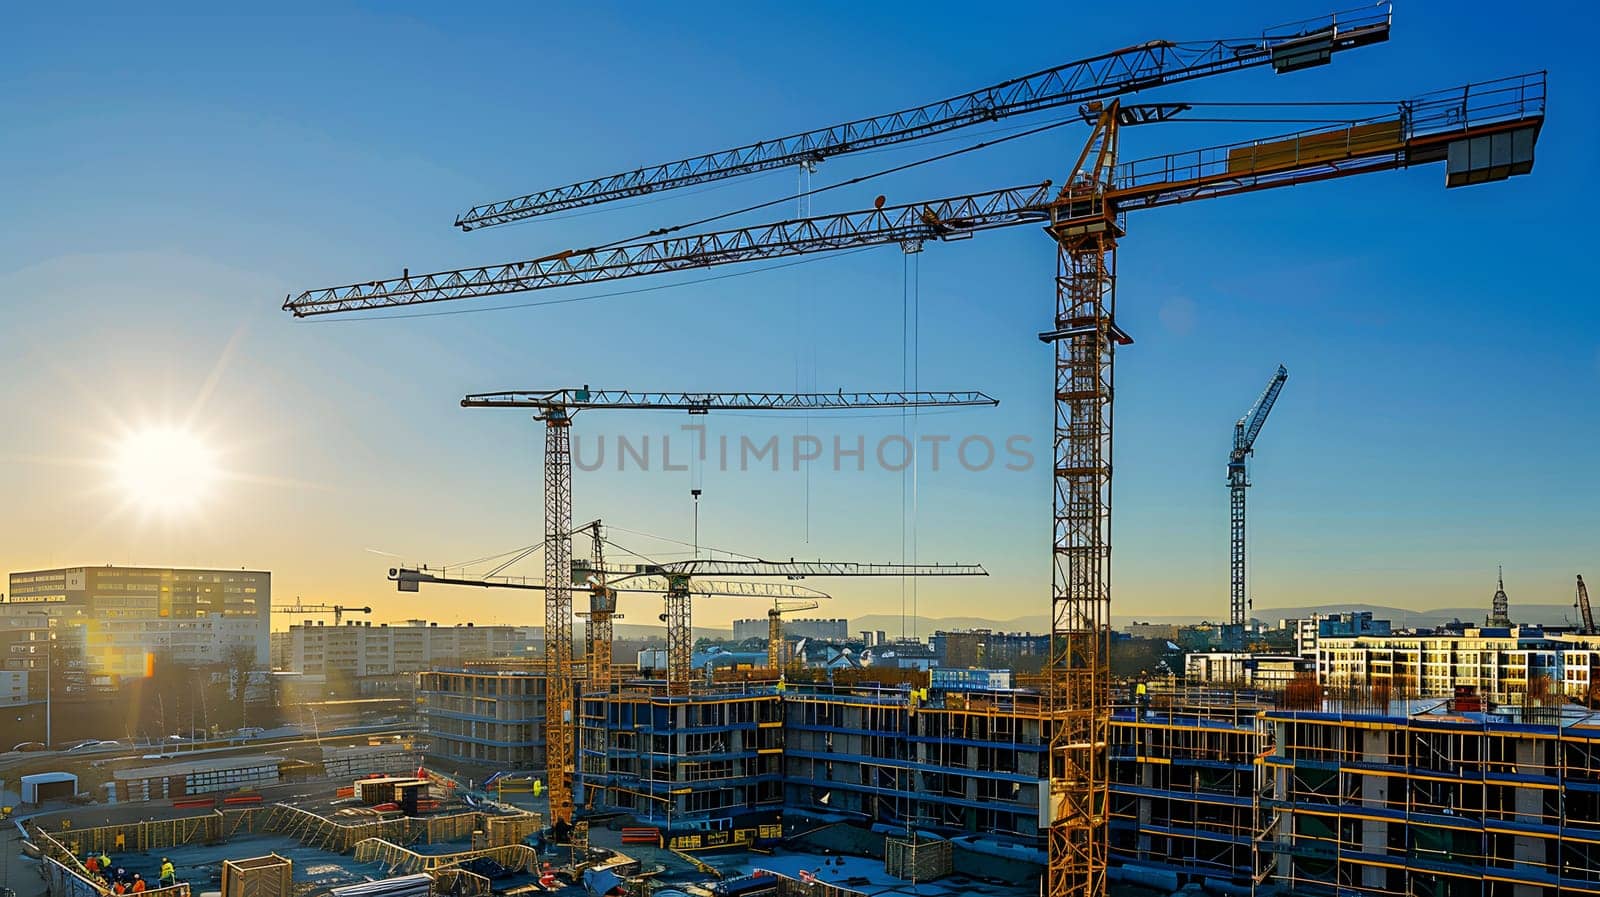 Skyline filled with cranes and towers in an urban construction site by Nadtochiy